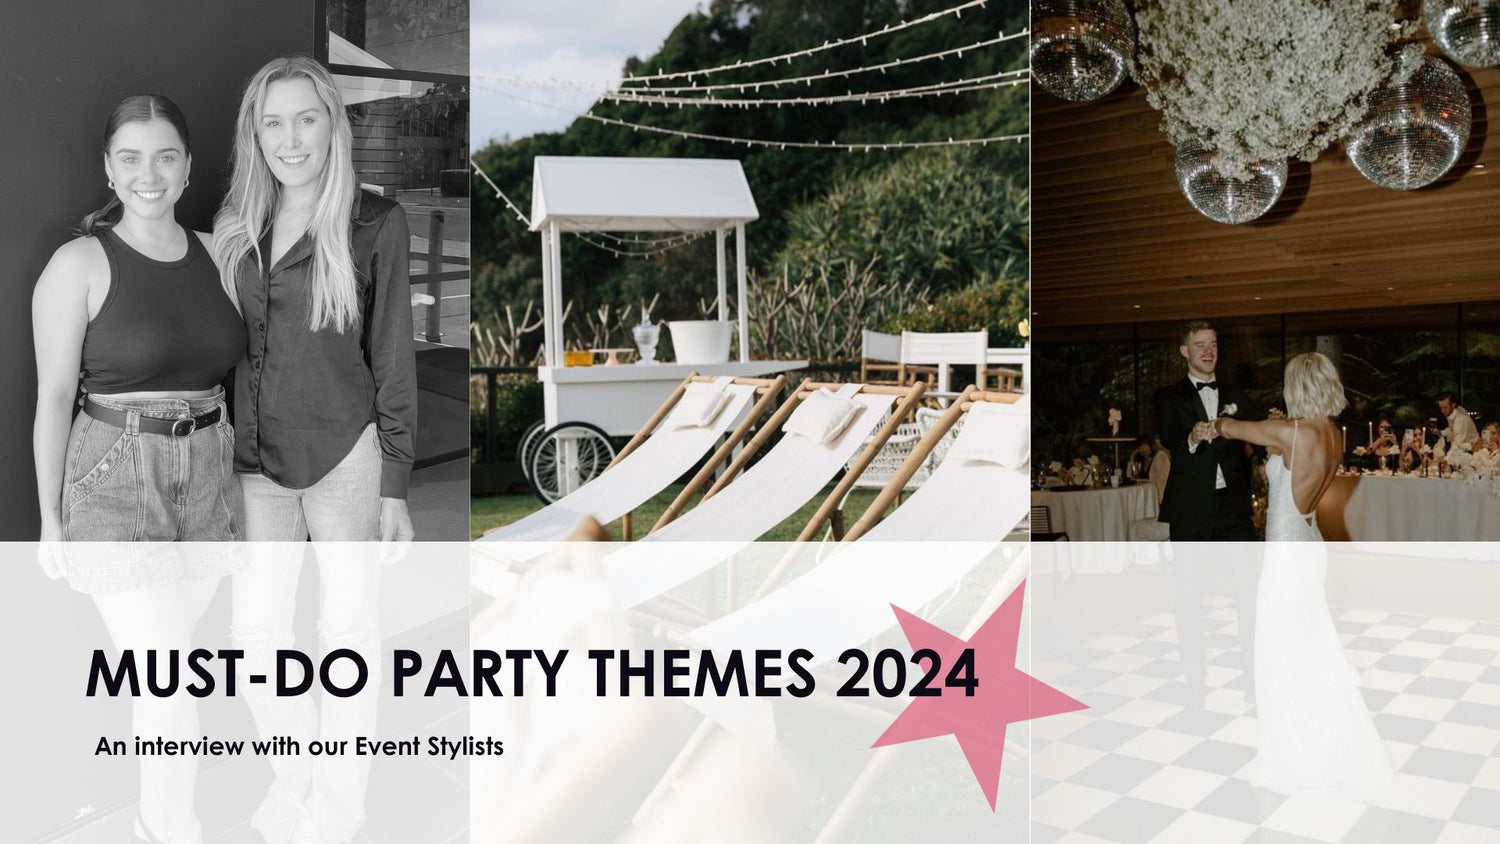 Party Themes: What's in store for 2024